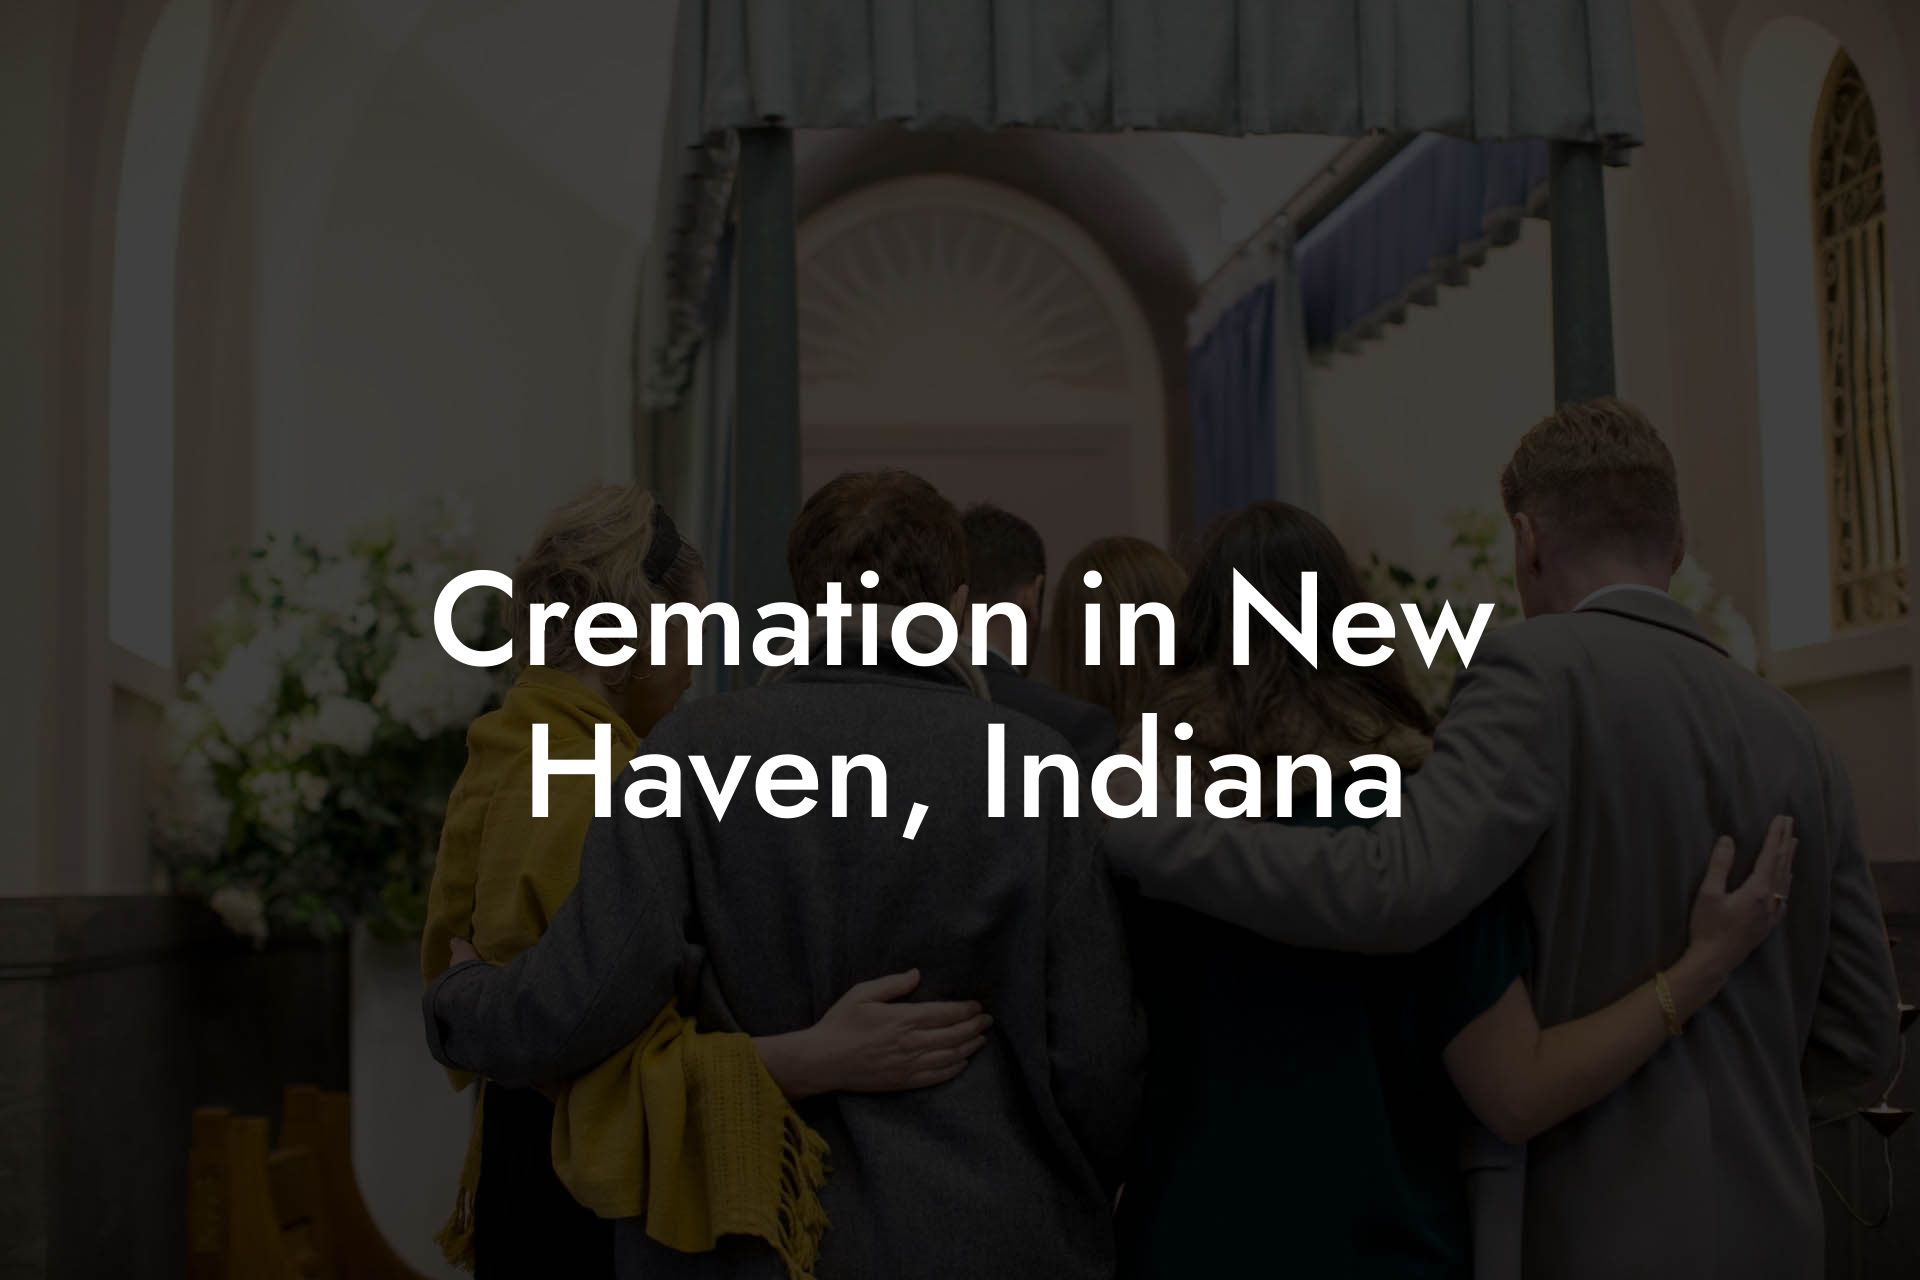 Cremation in New Haven, Indiana